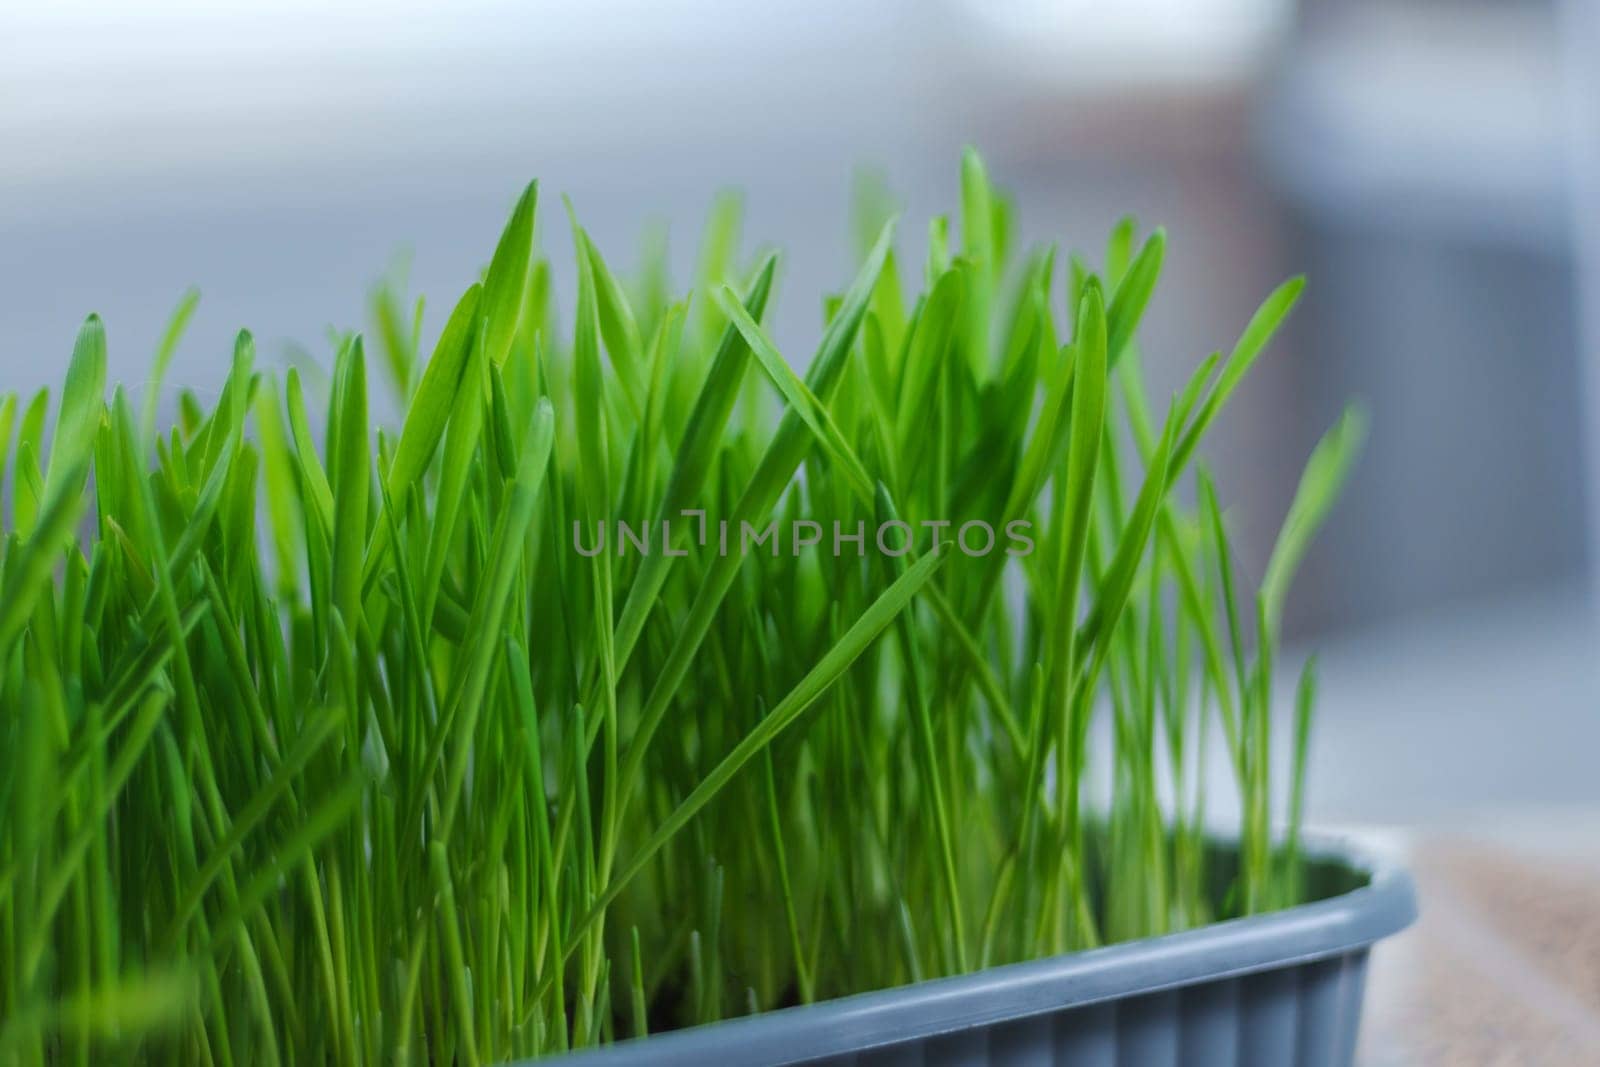 Filled to the brim with fresh green grass, possibly intended for cats or growing microgreens. by darksoul72